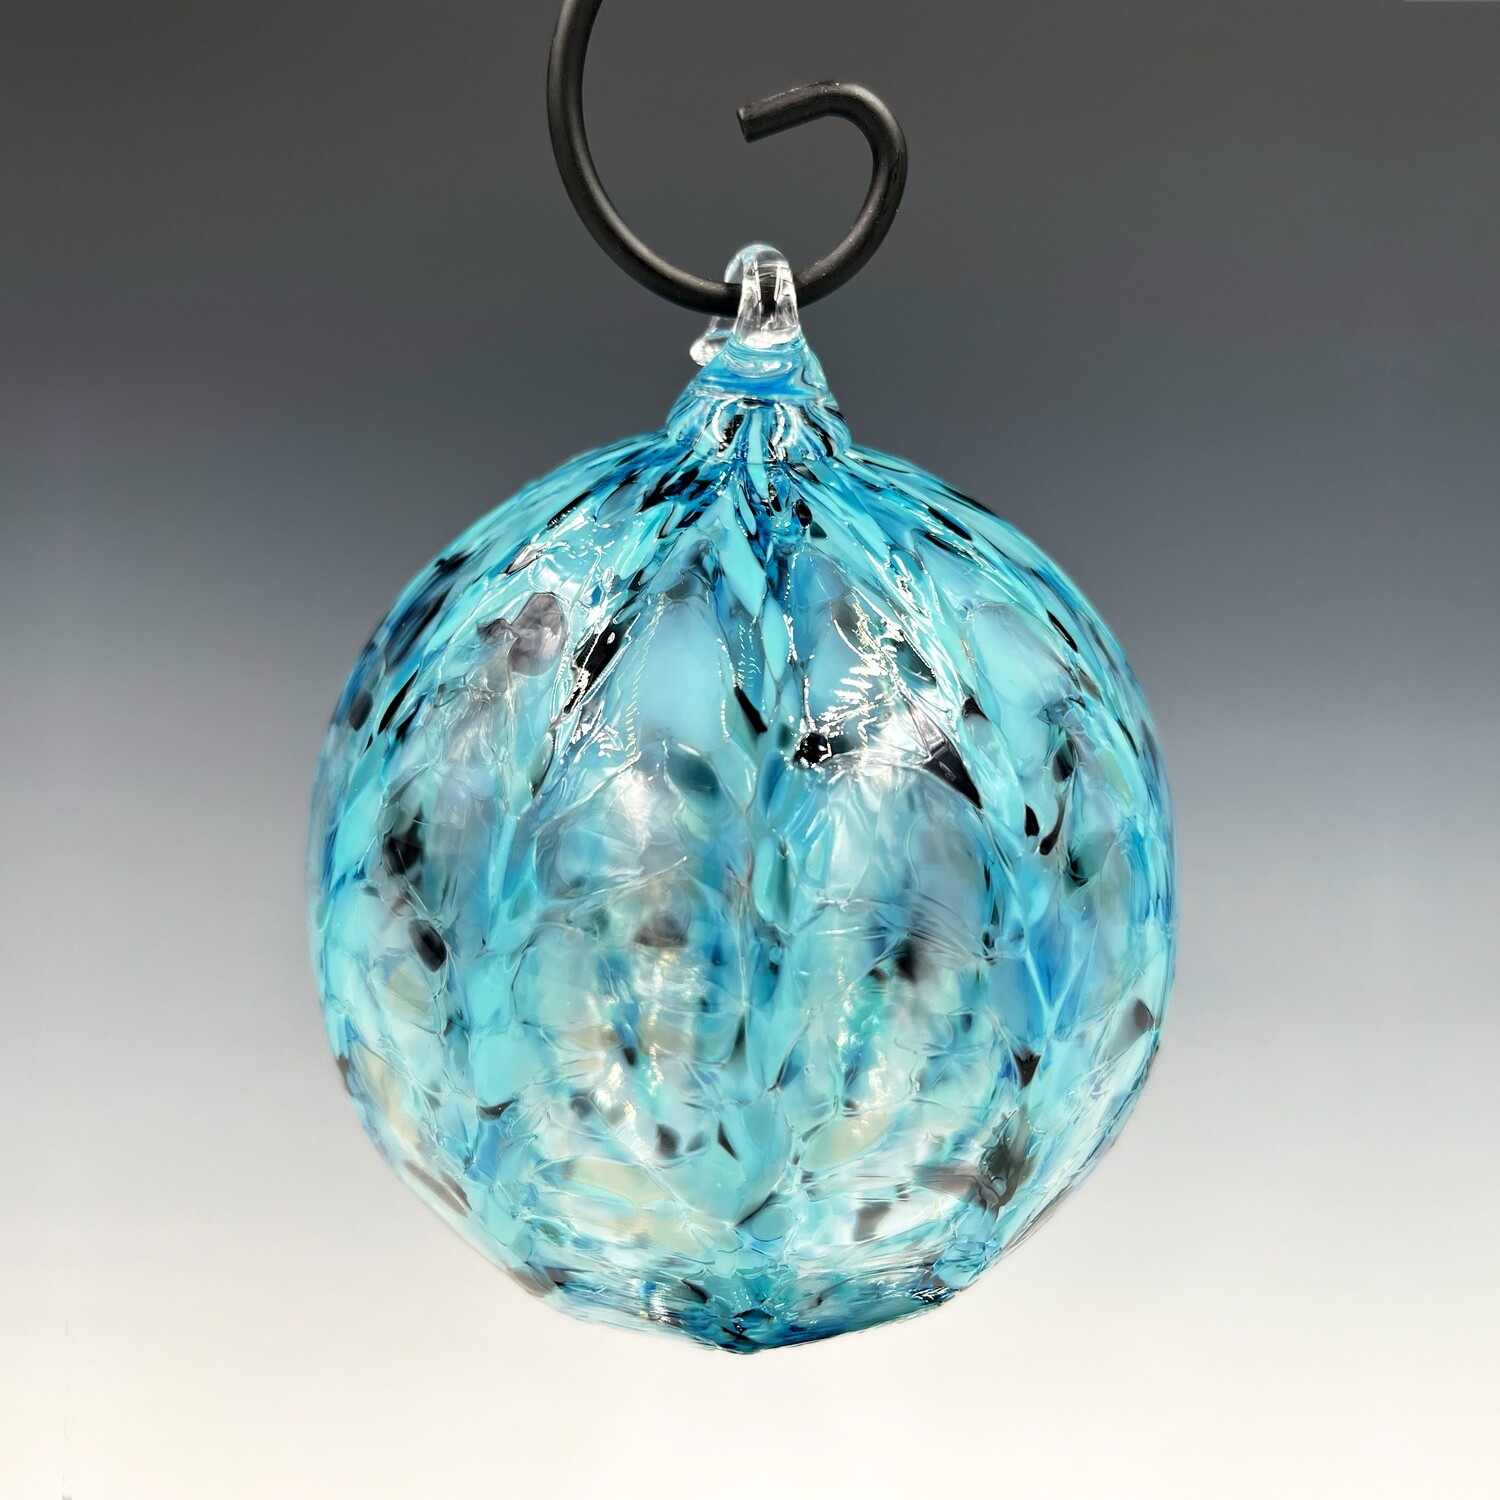 Glass Ornament in Southwest Mix